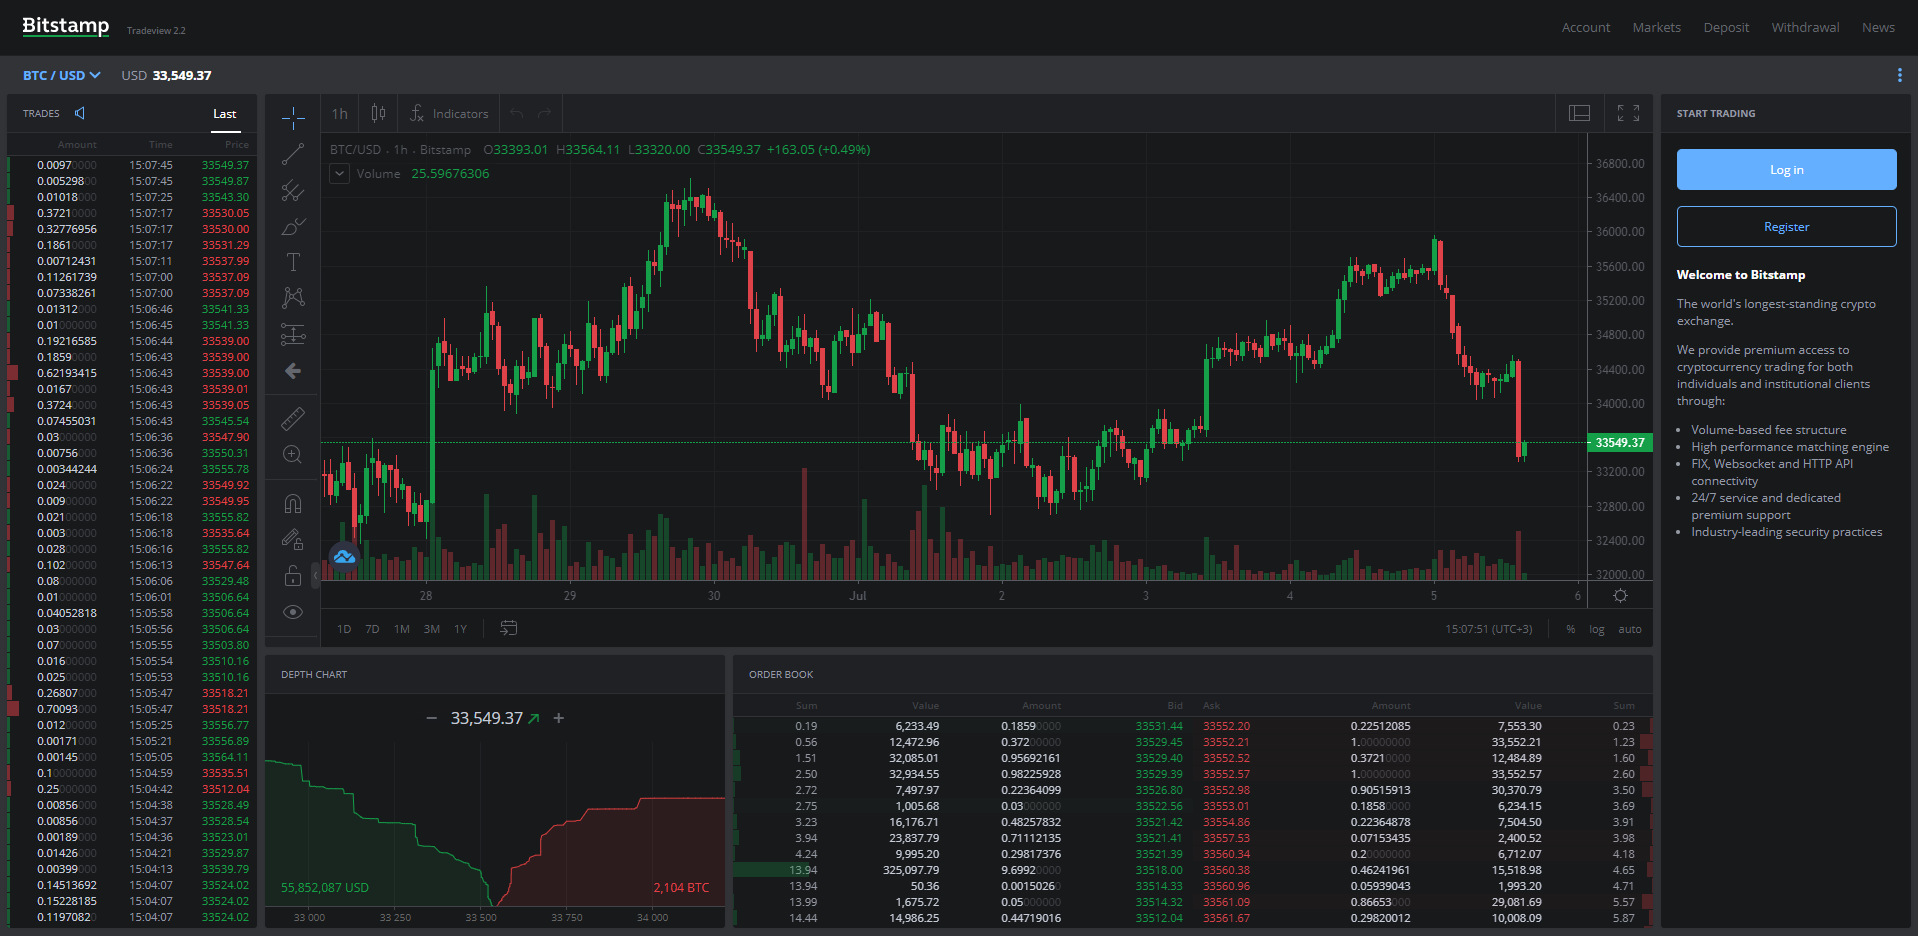 How to trade bitstamp cryptocurrency berj